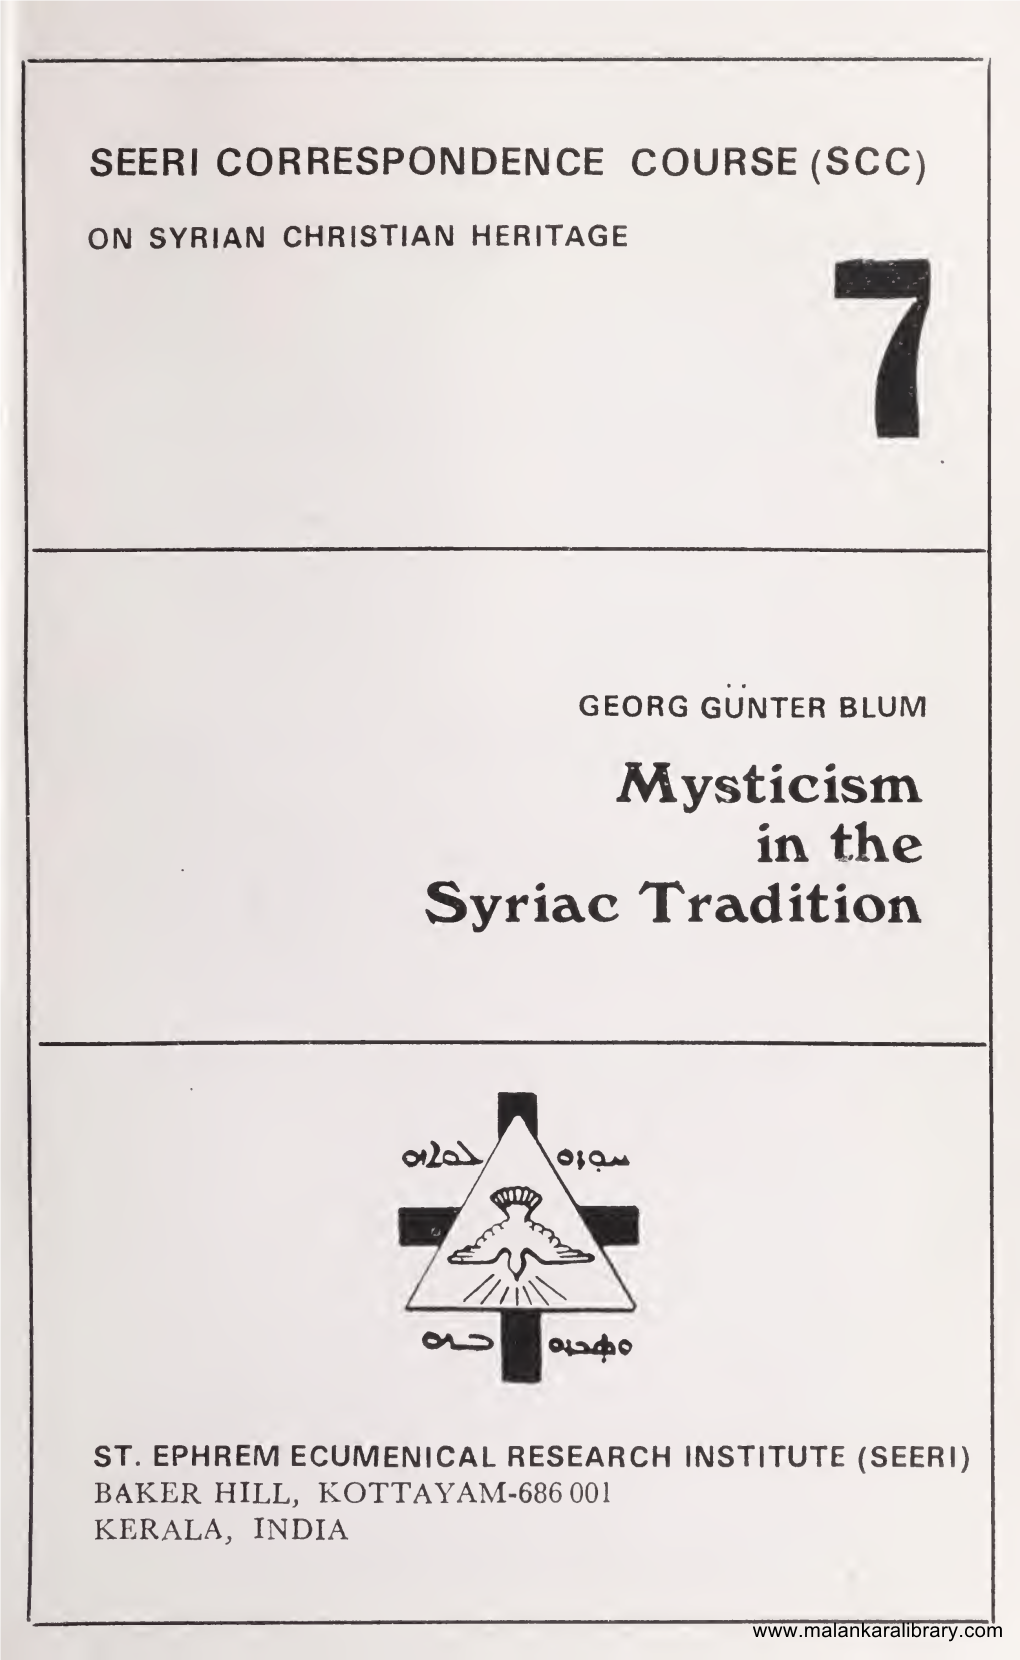 Mysticism in the Syriac Tradition